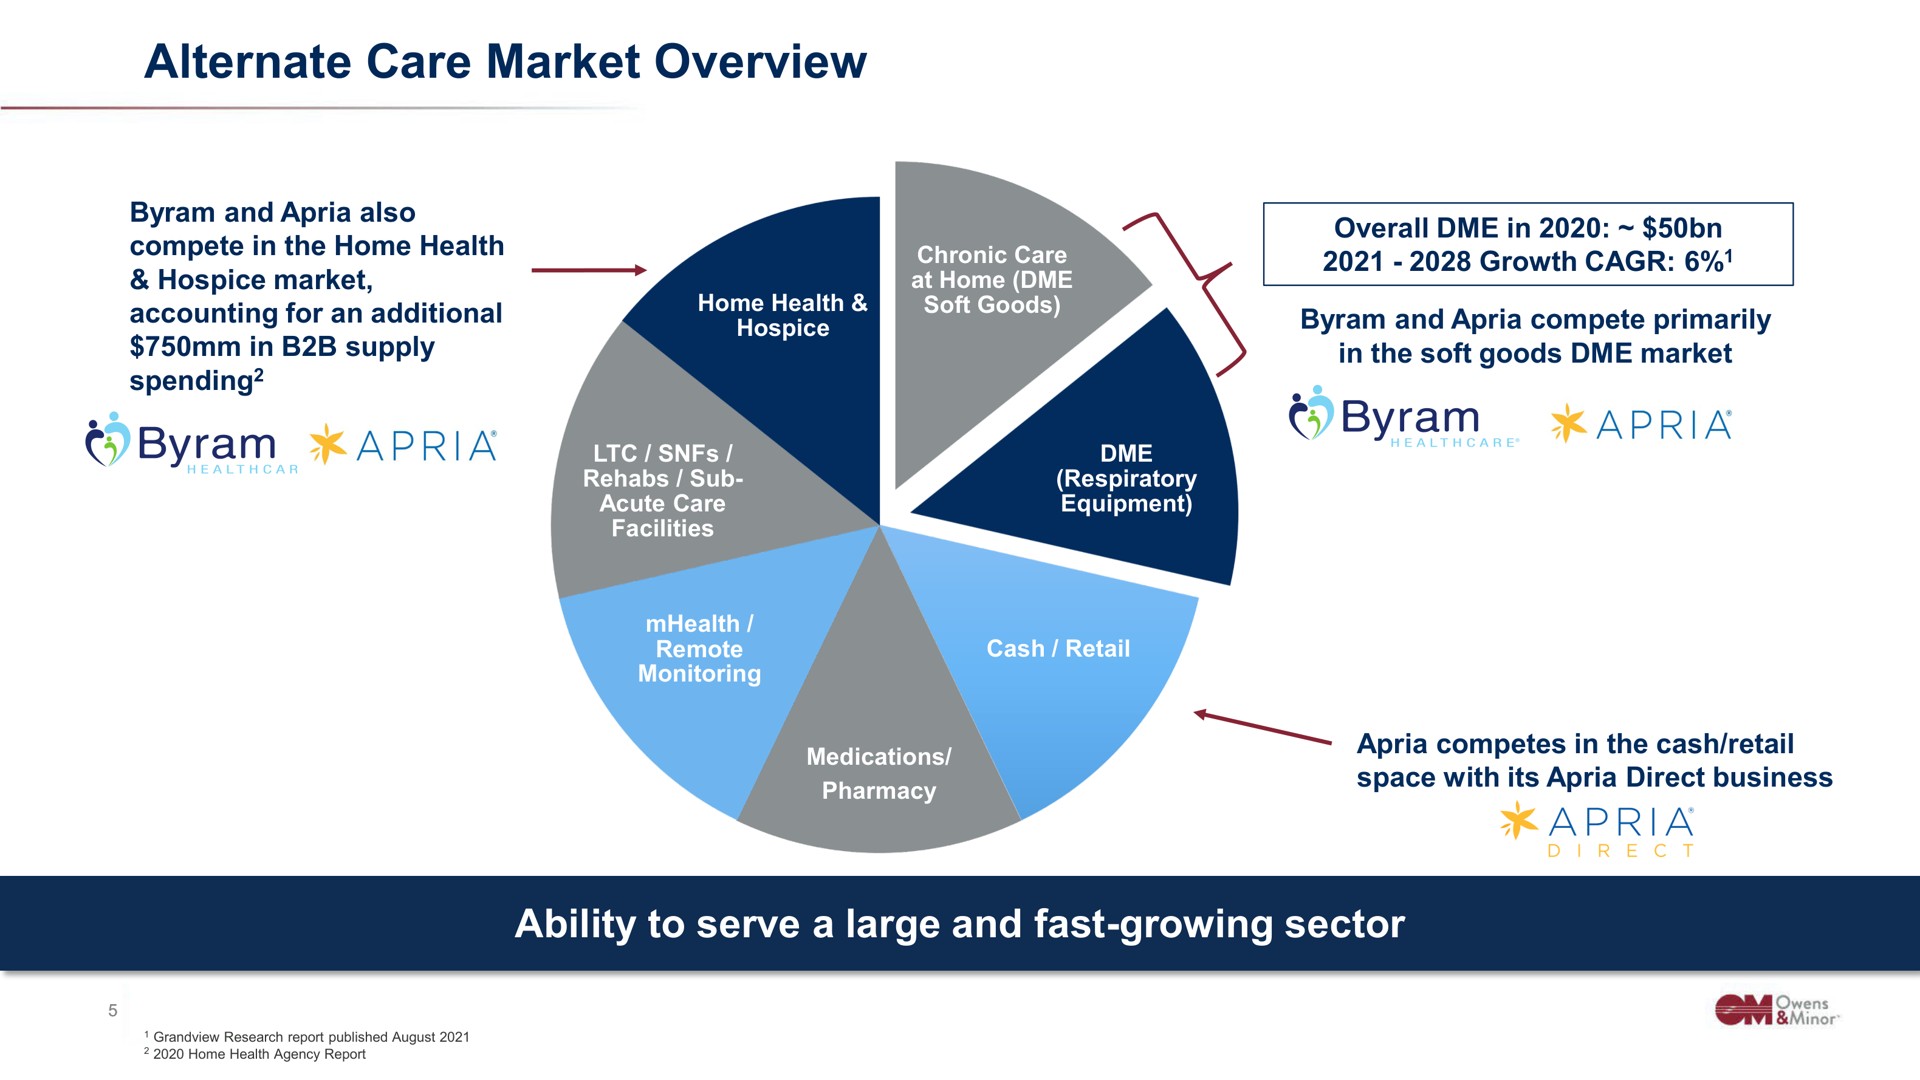 alternate care market overview ability to serve a large and fast growing sector overall in | Owens&Minor